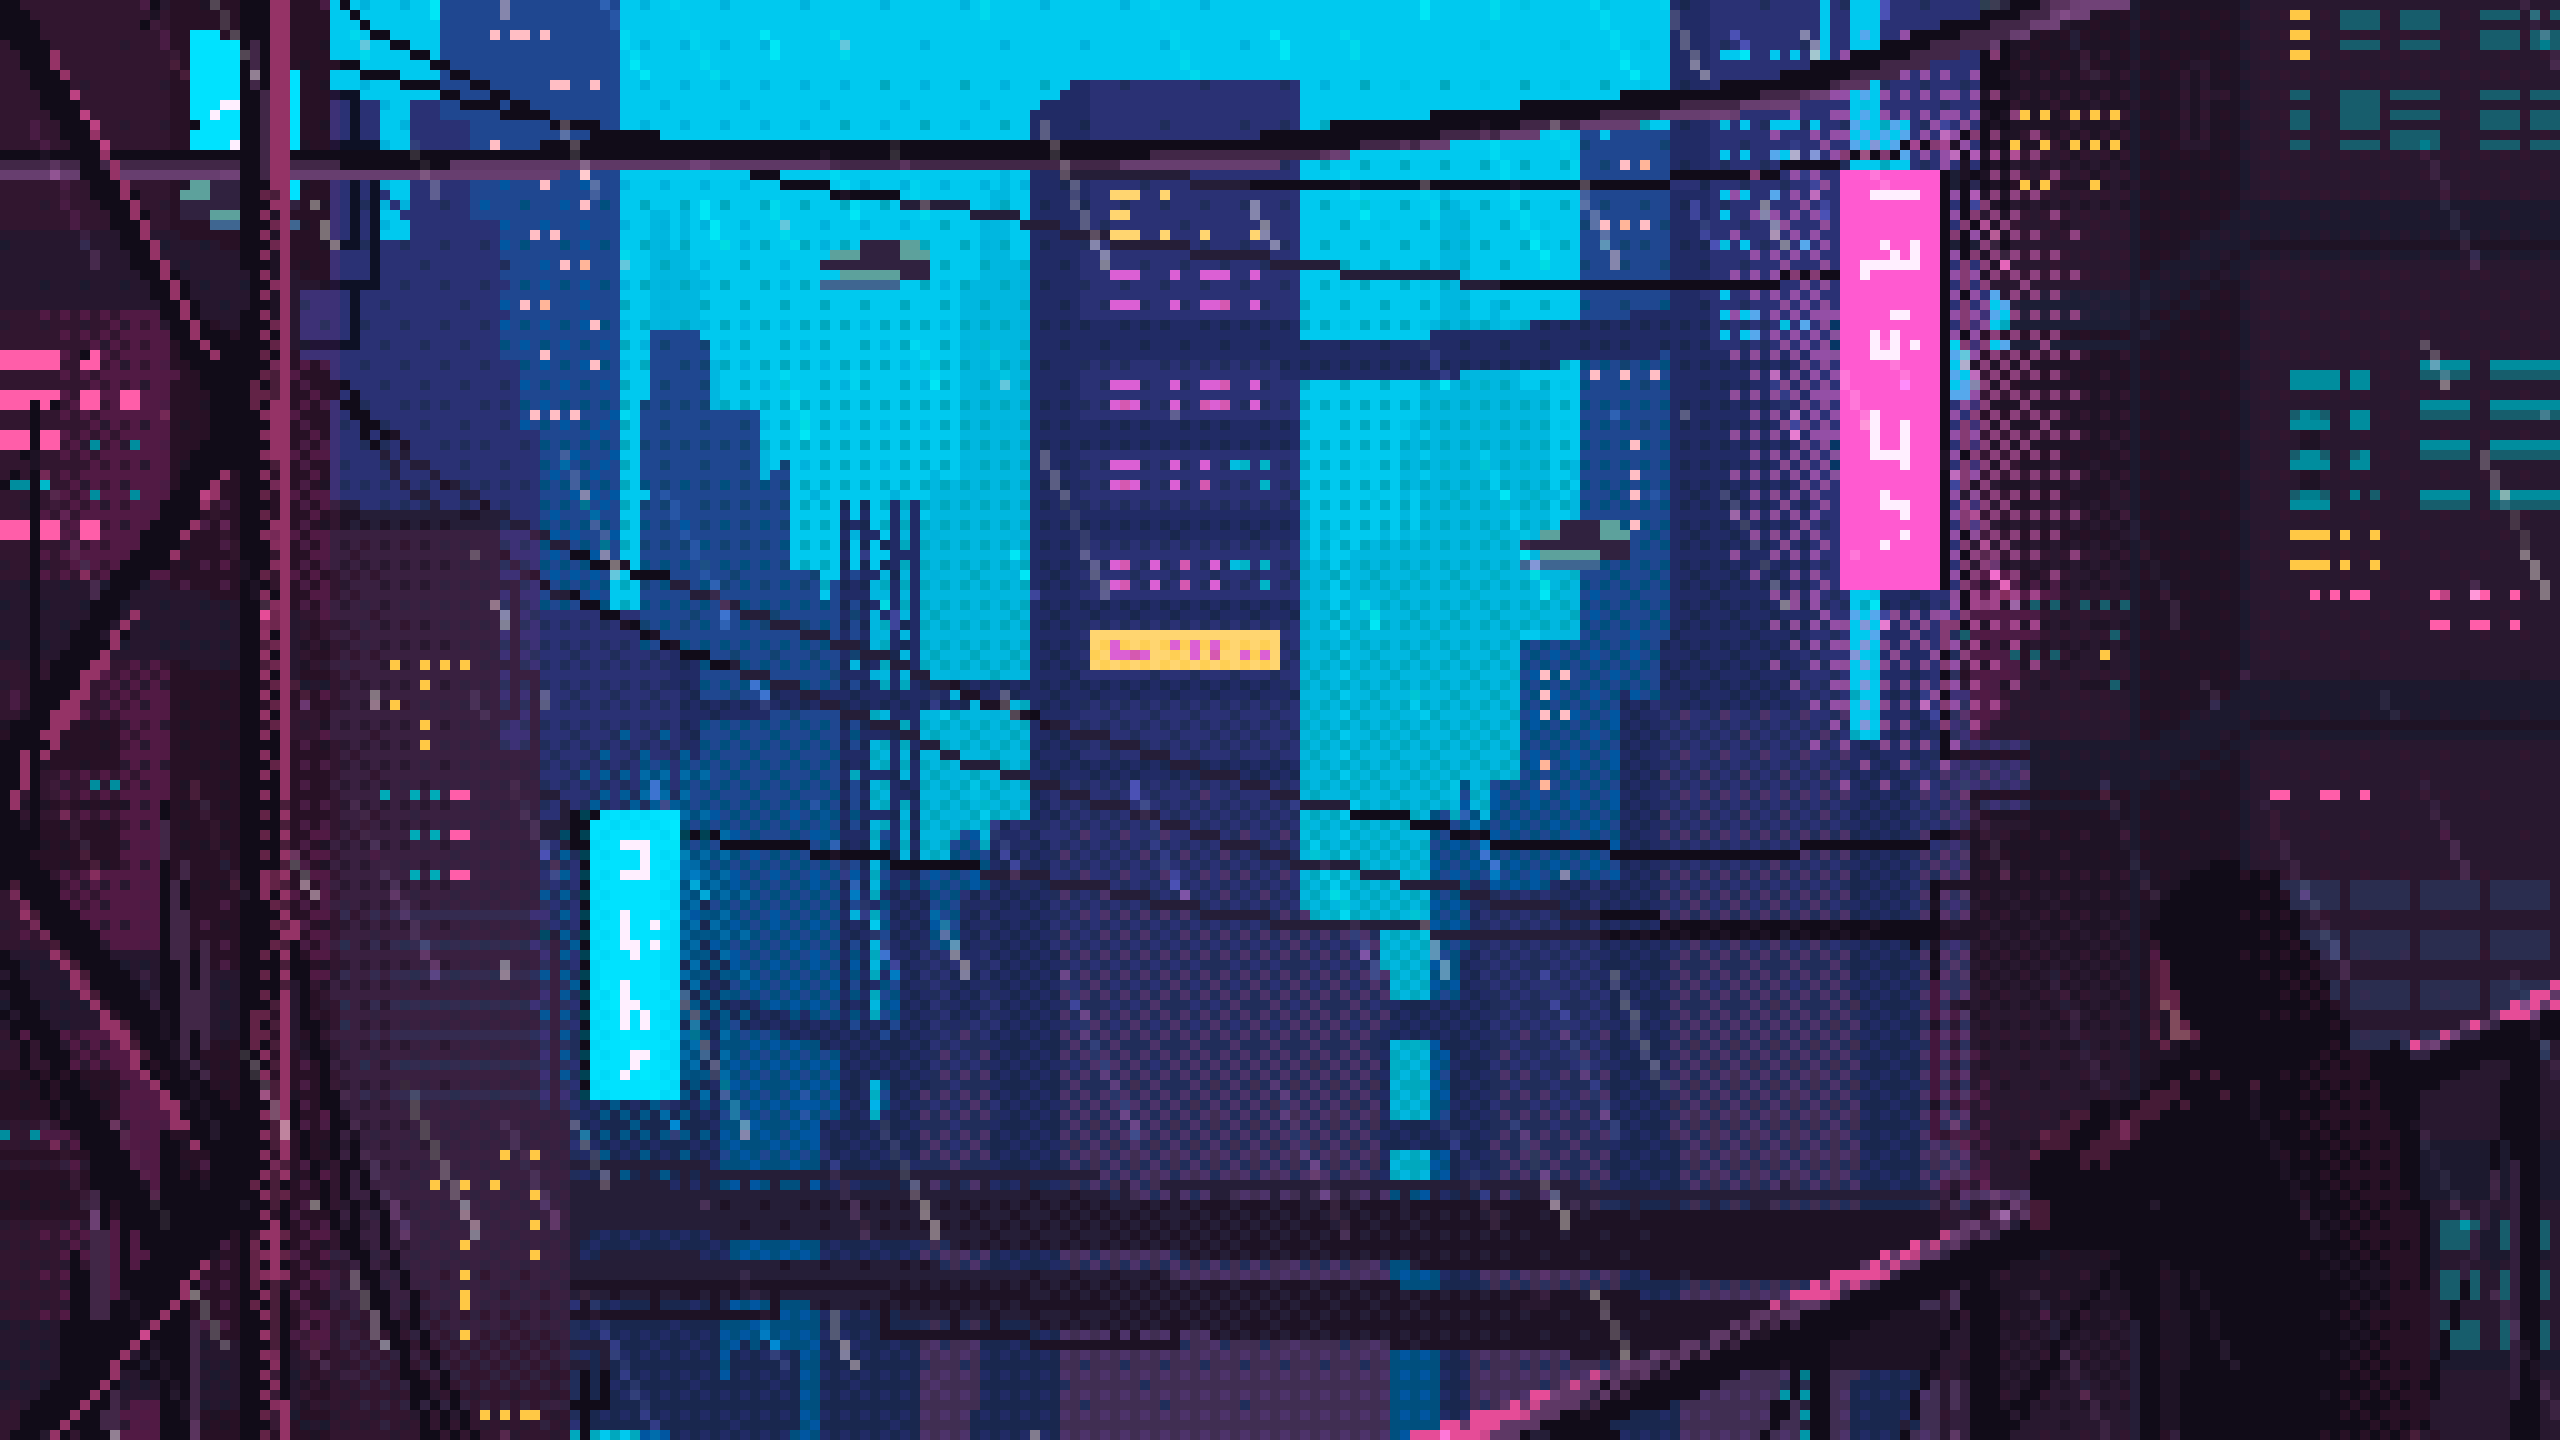 pixel art  metropolis  cyberpunk  valenberg  gif gif animation  animated pictures  funny pictures  best jokes comics images video  humor gif animation  i lold